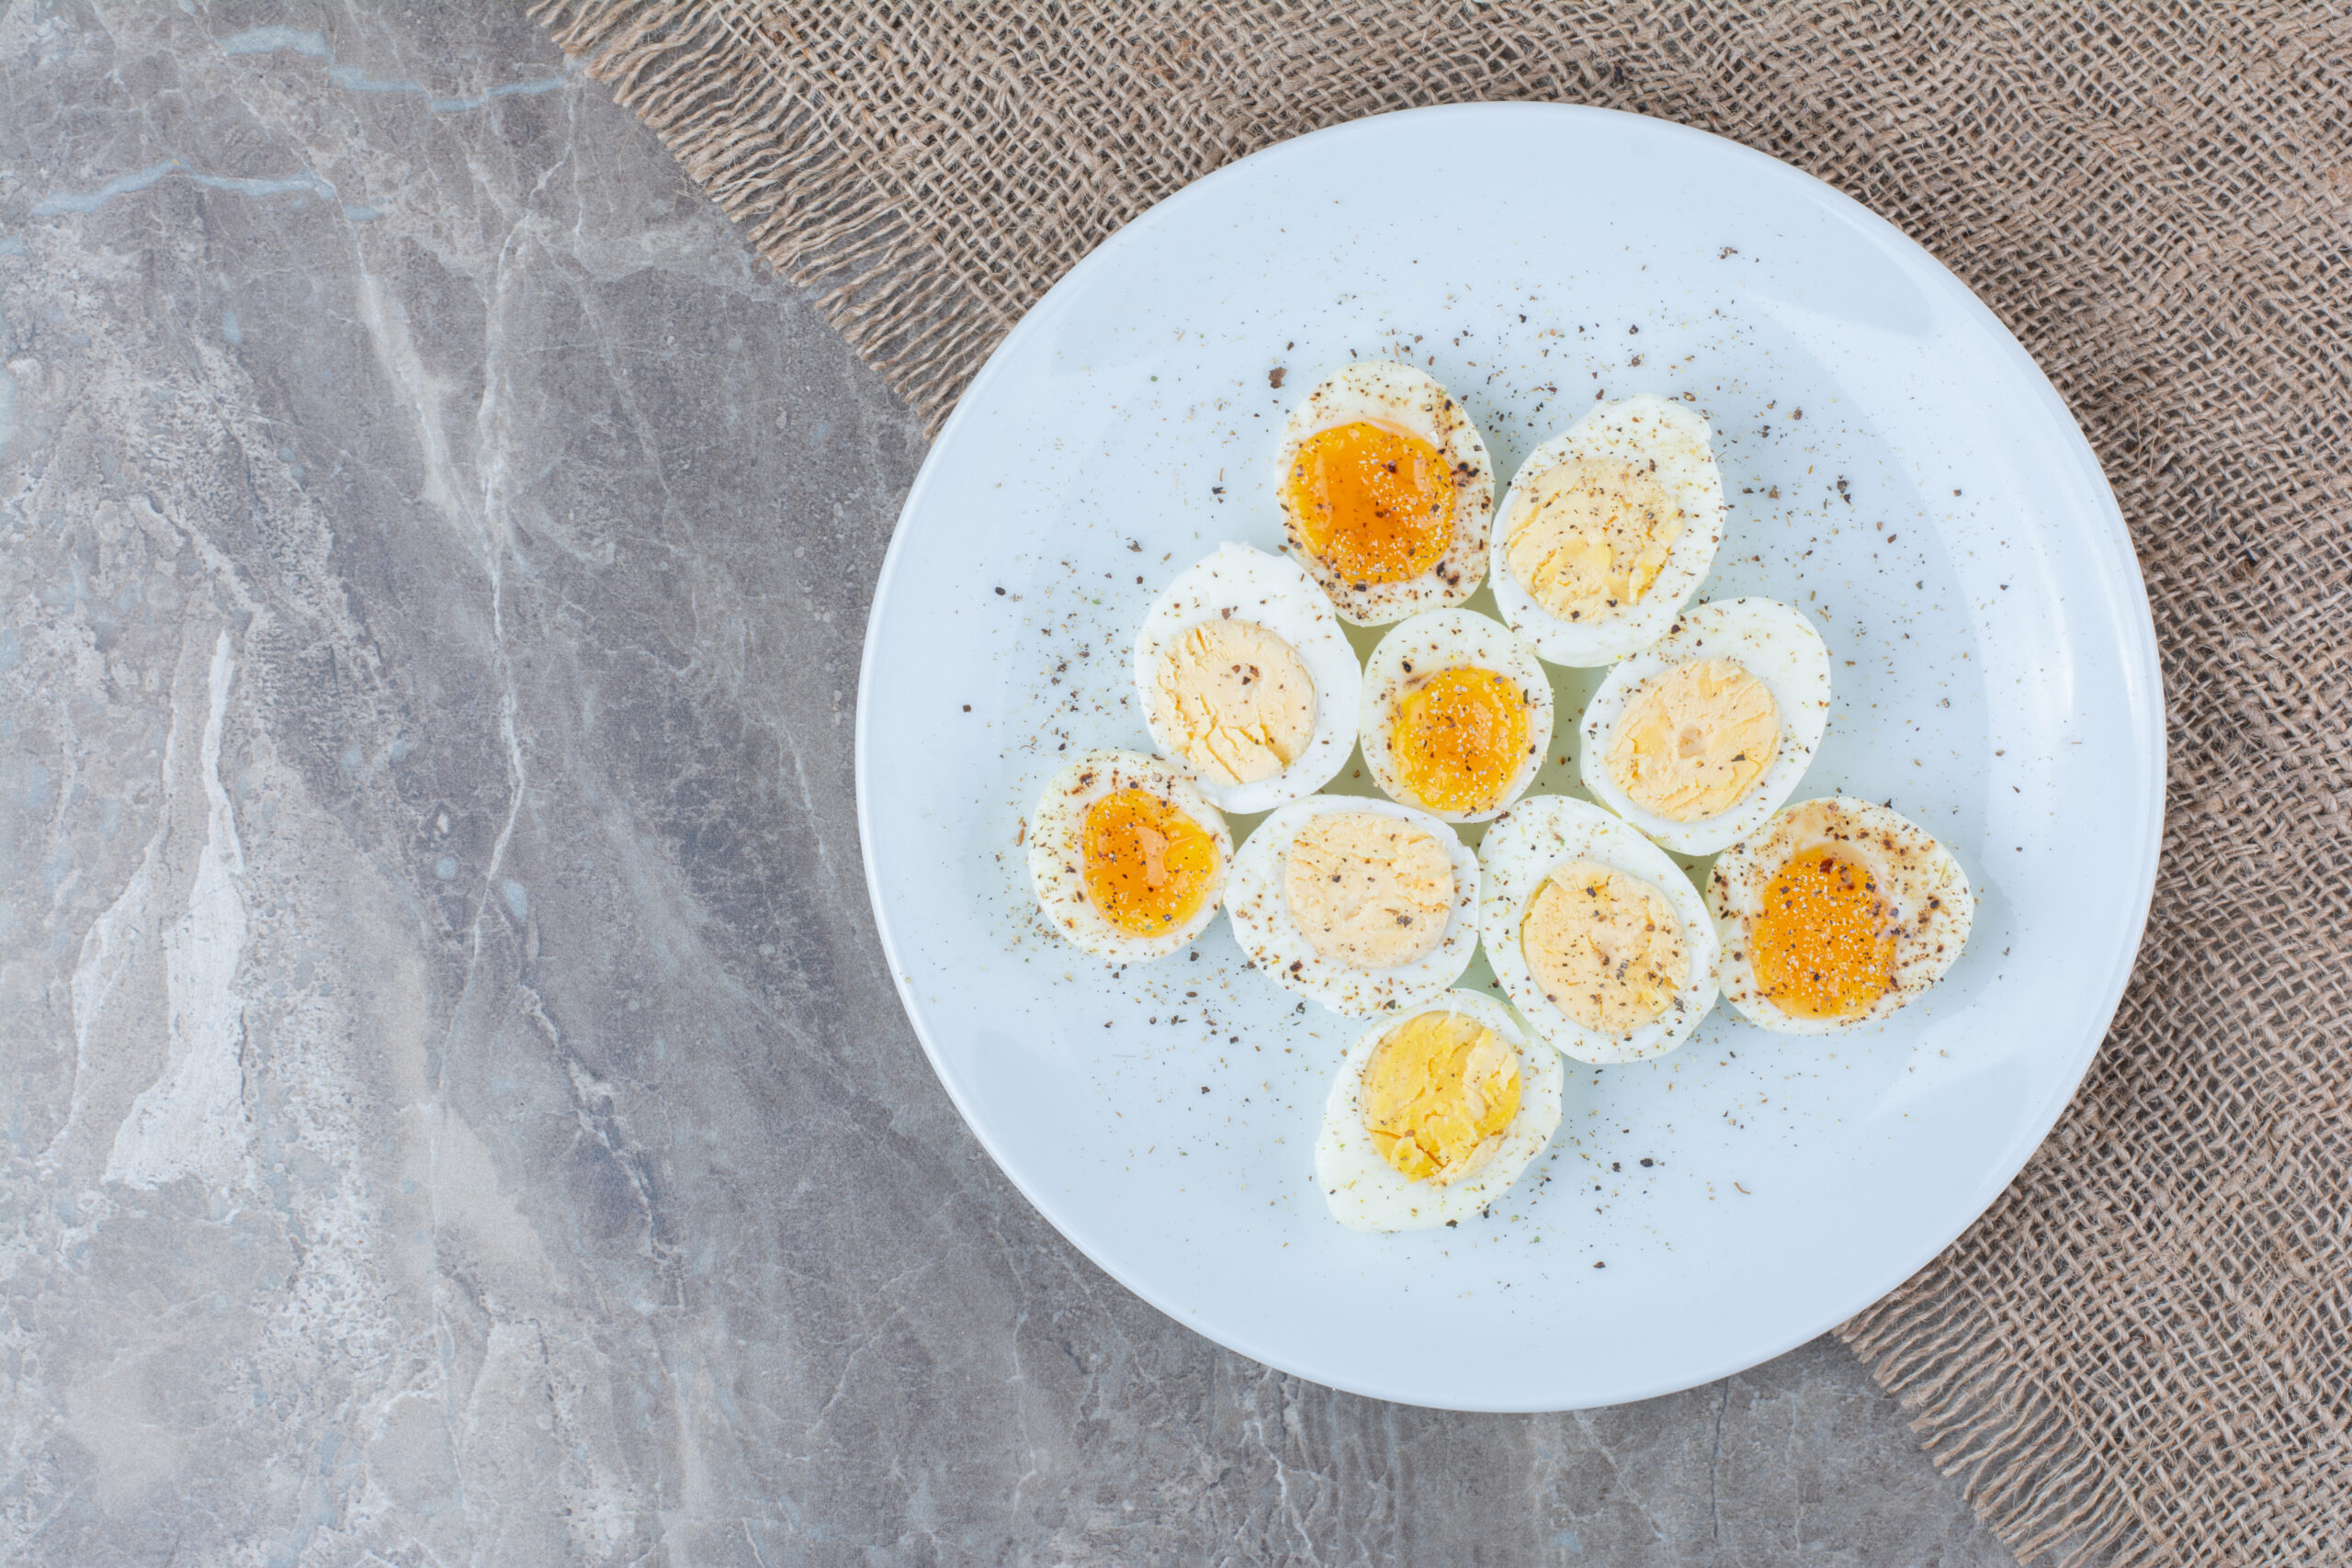 Salted Eggs in Singapore